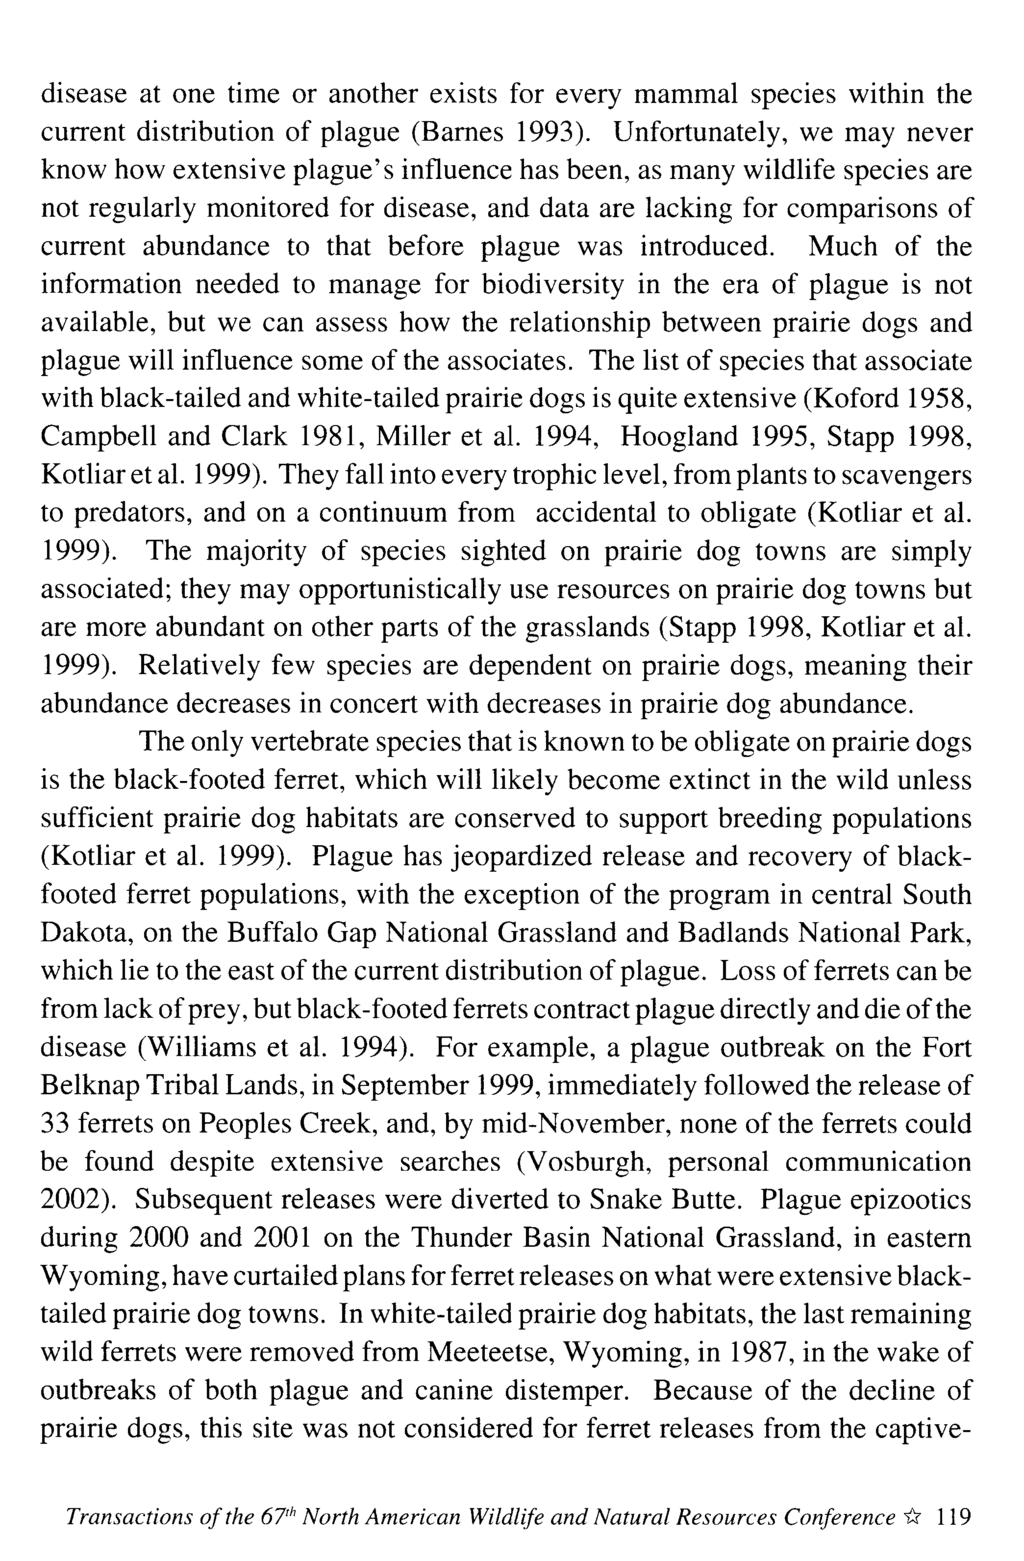 disease at one time or another exists for every mammal species within the current distribution of plague (Barnes 1993).